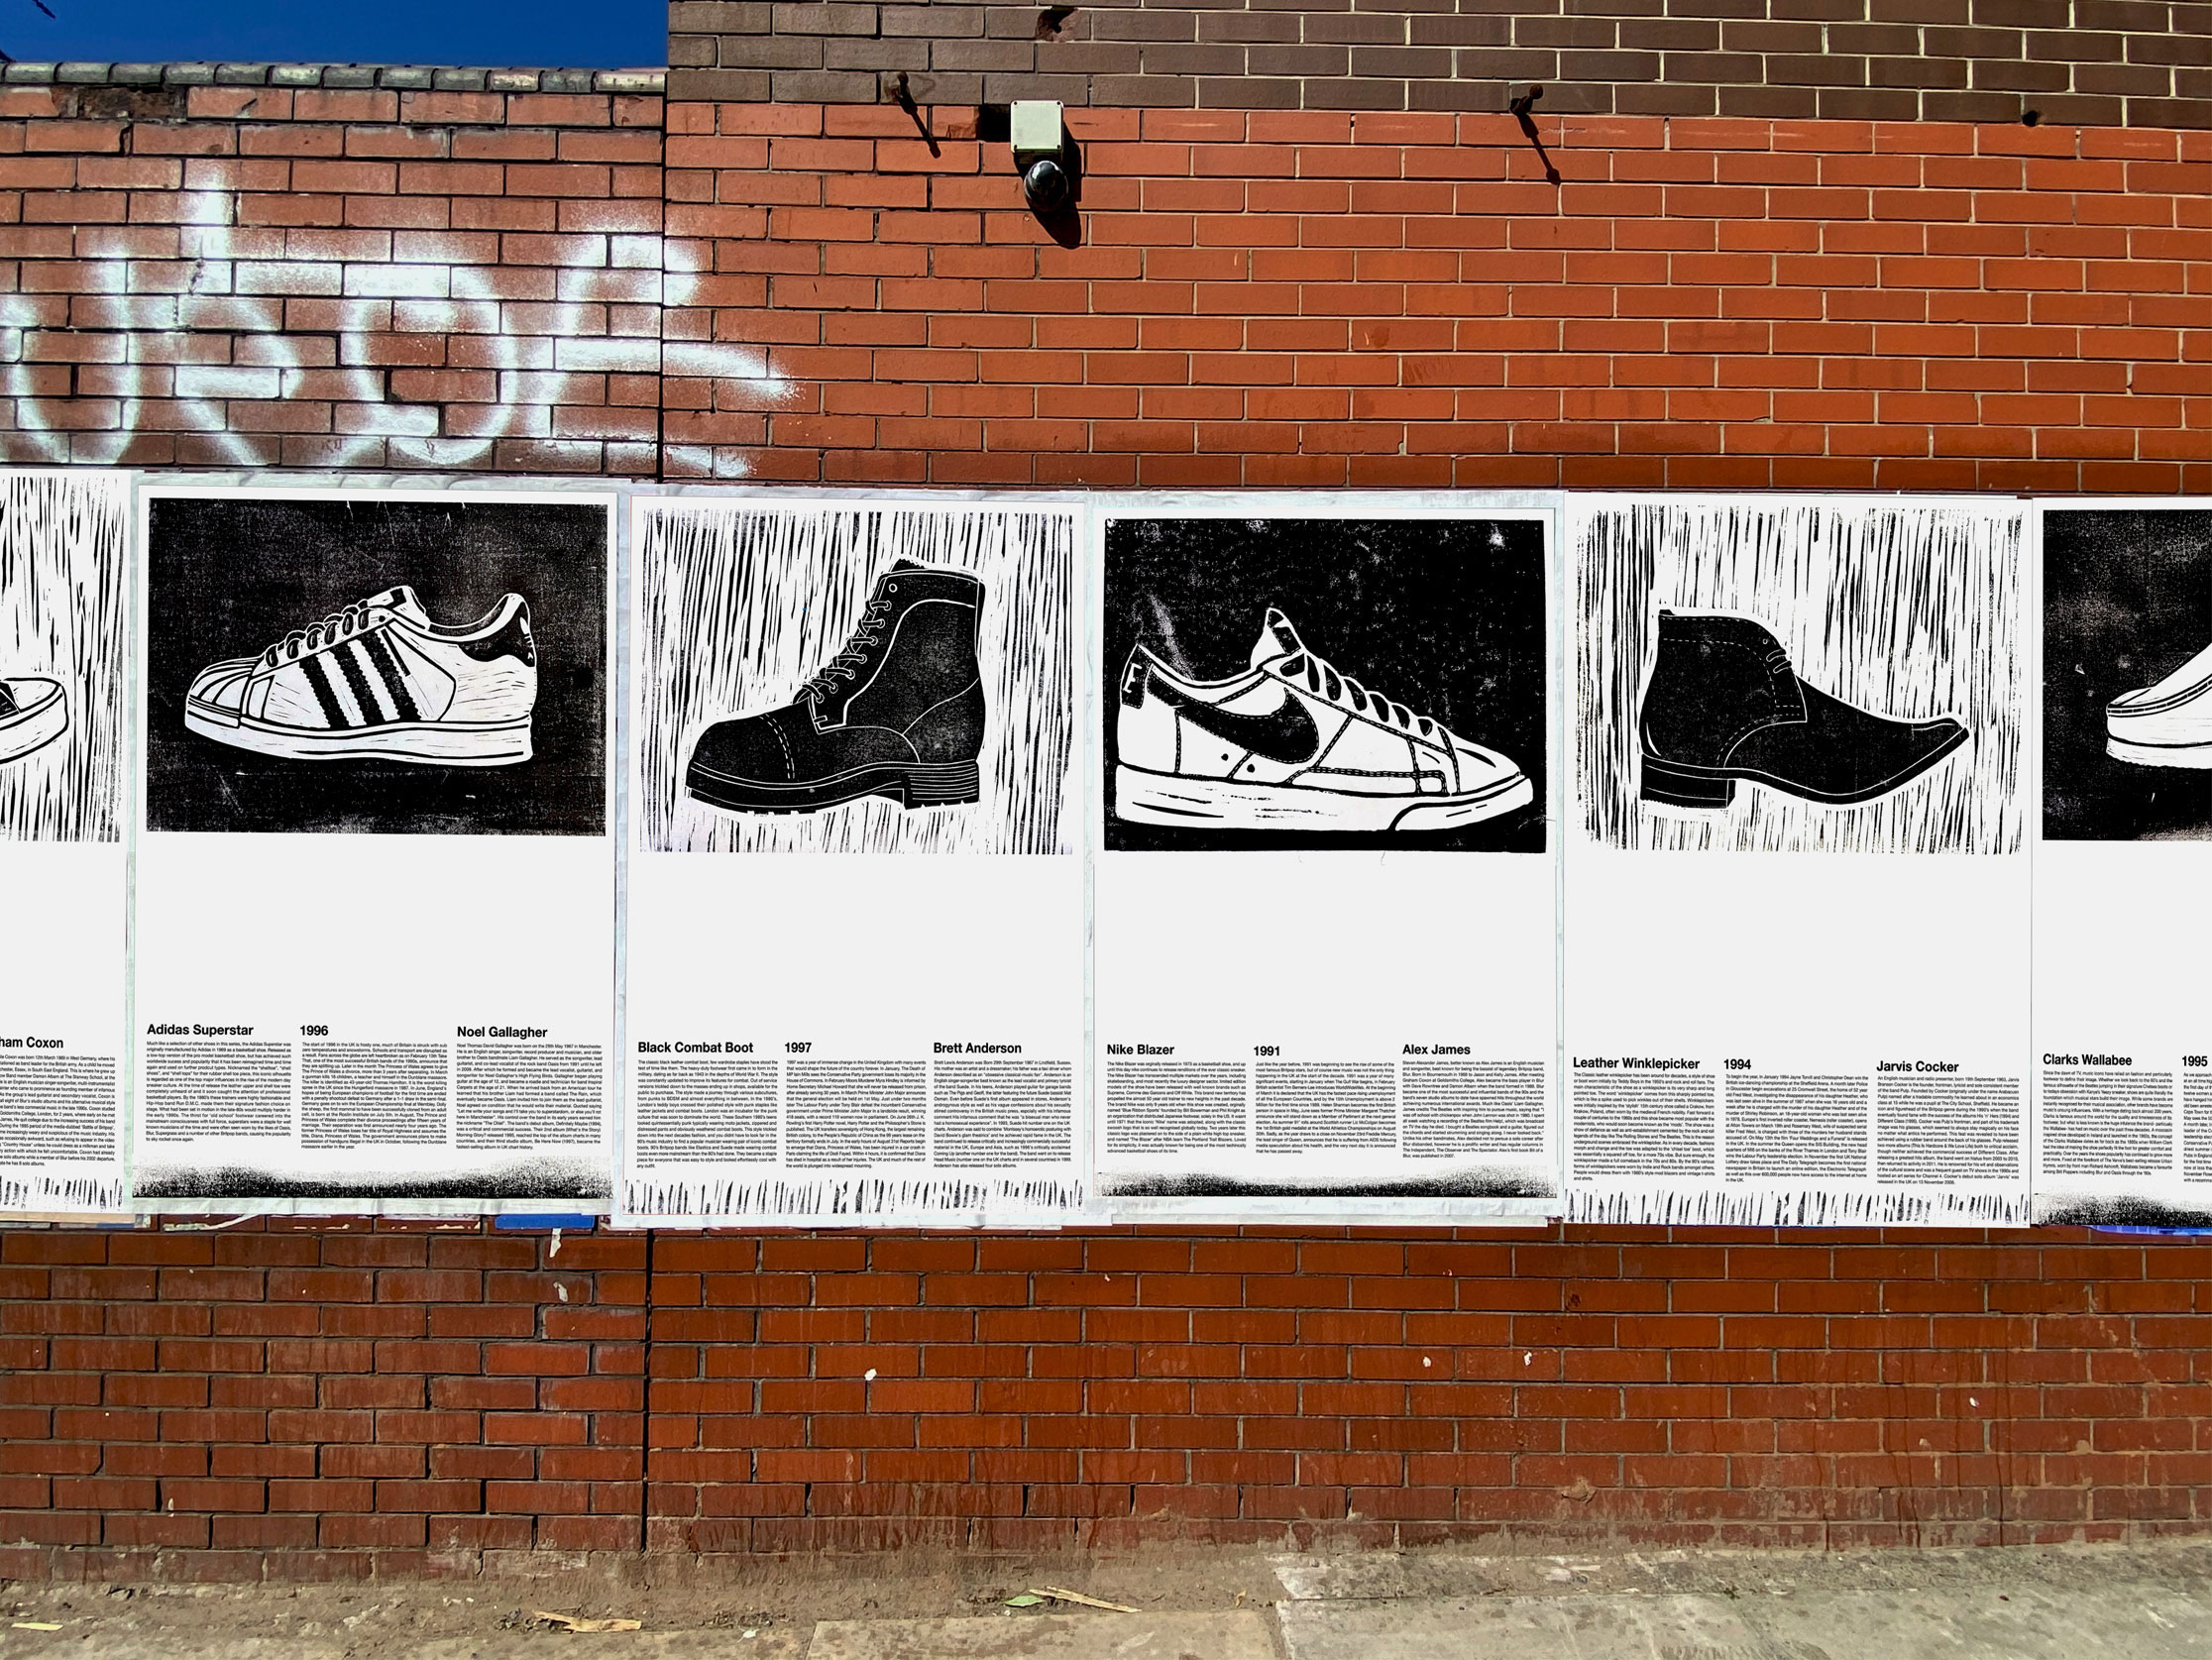 Mock-up photograph, series of poster in situ, featuring linocut print of trainers